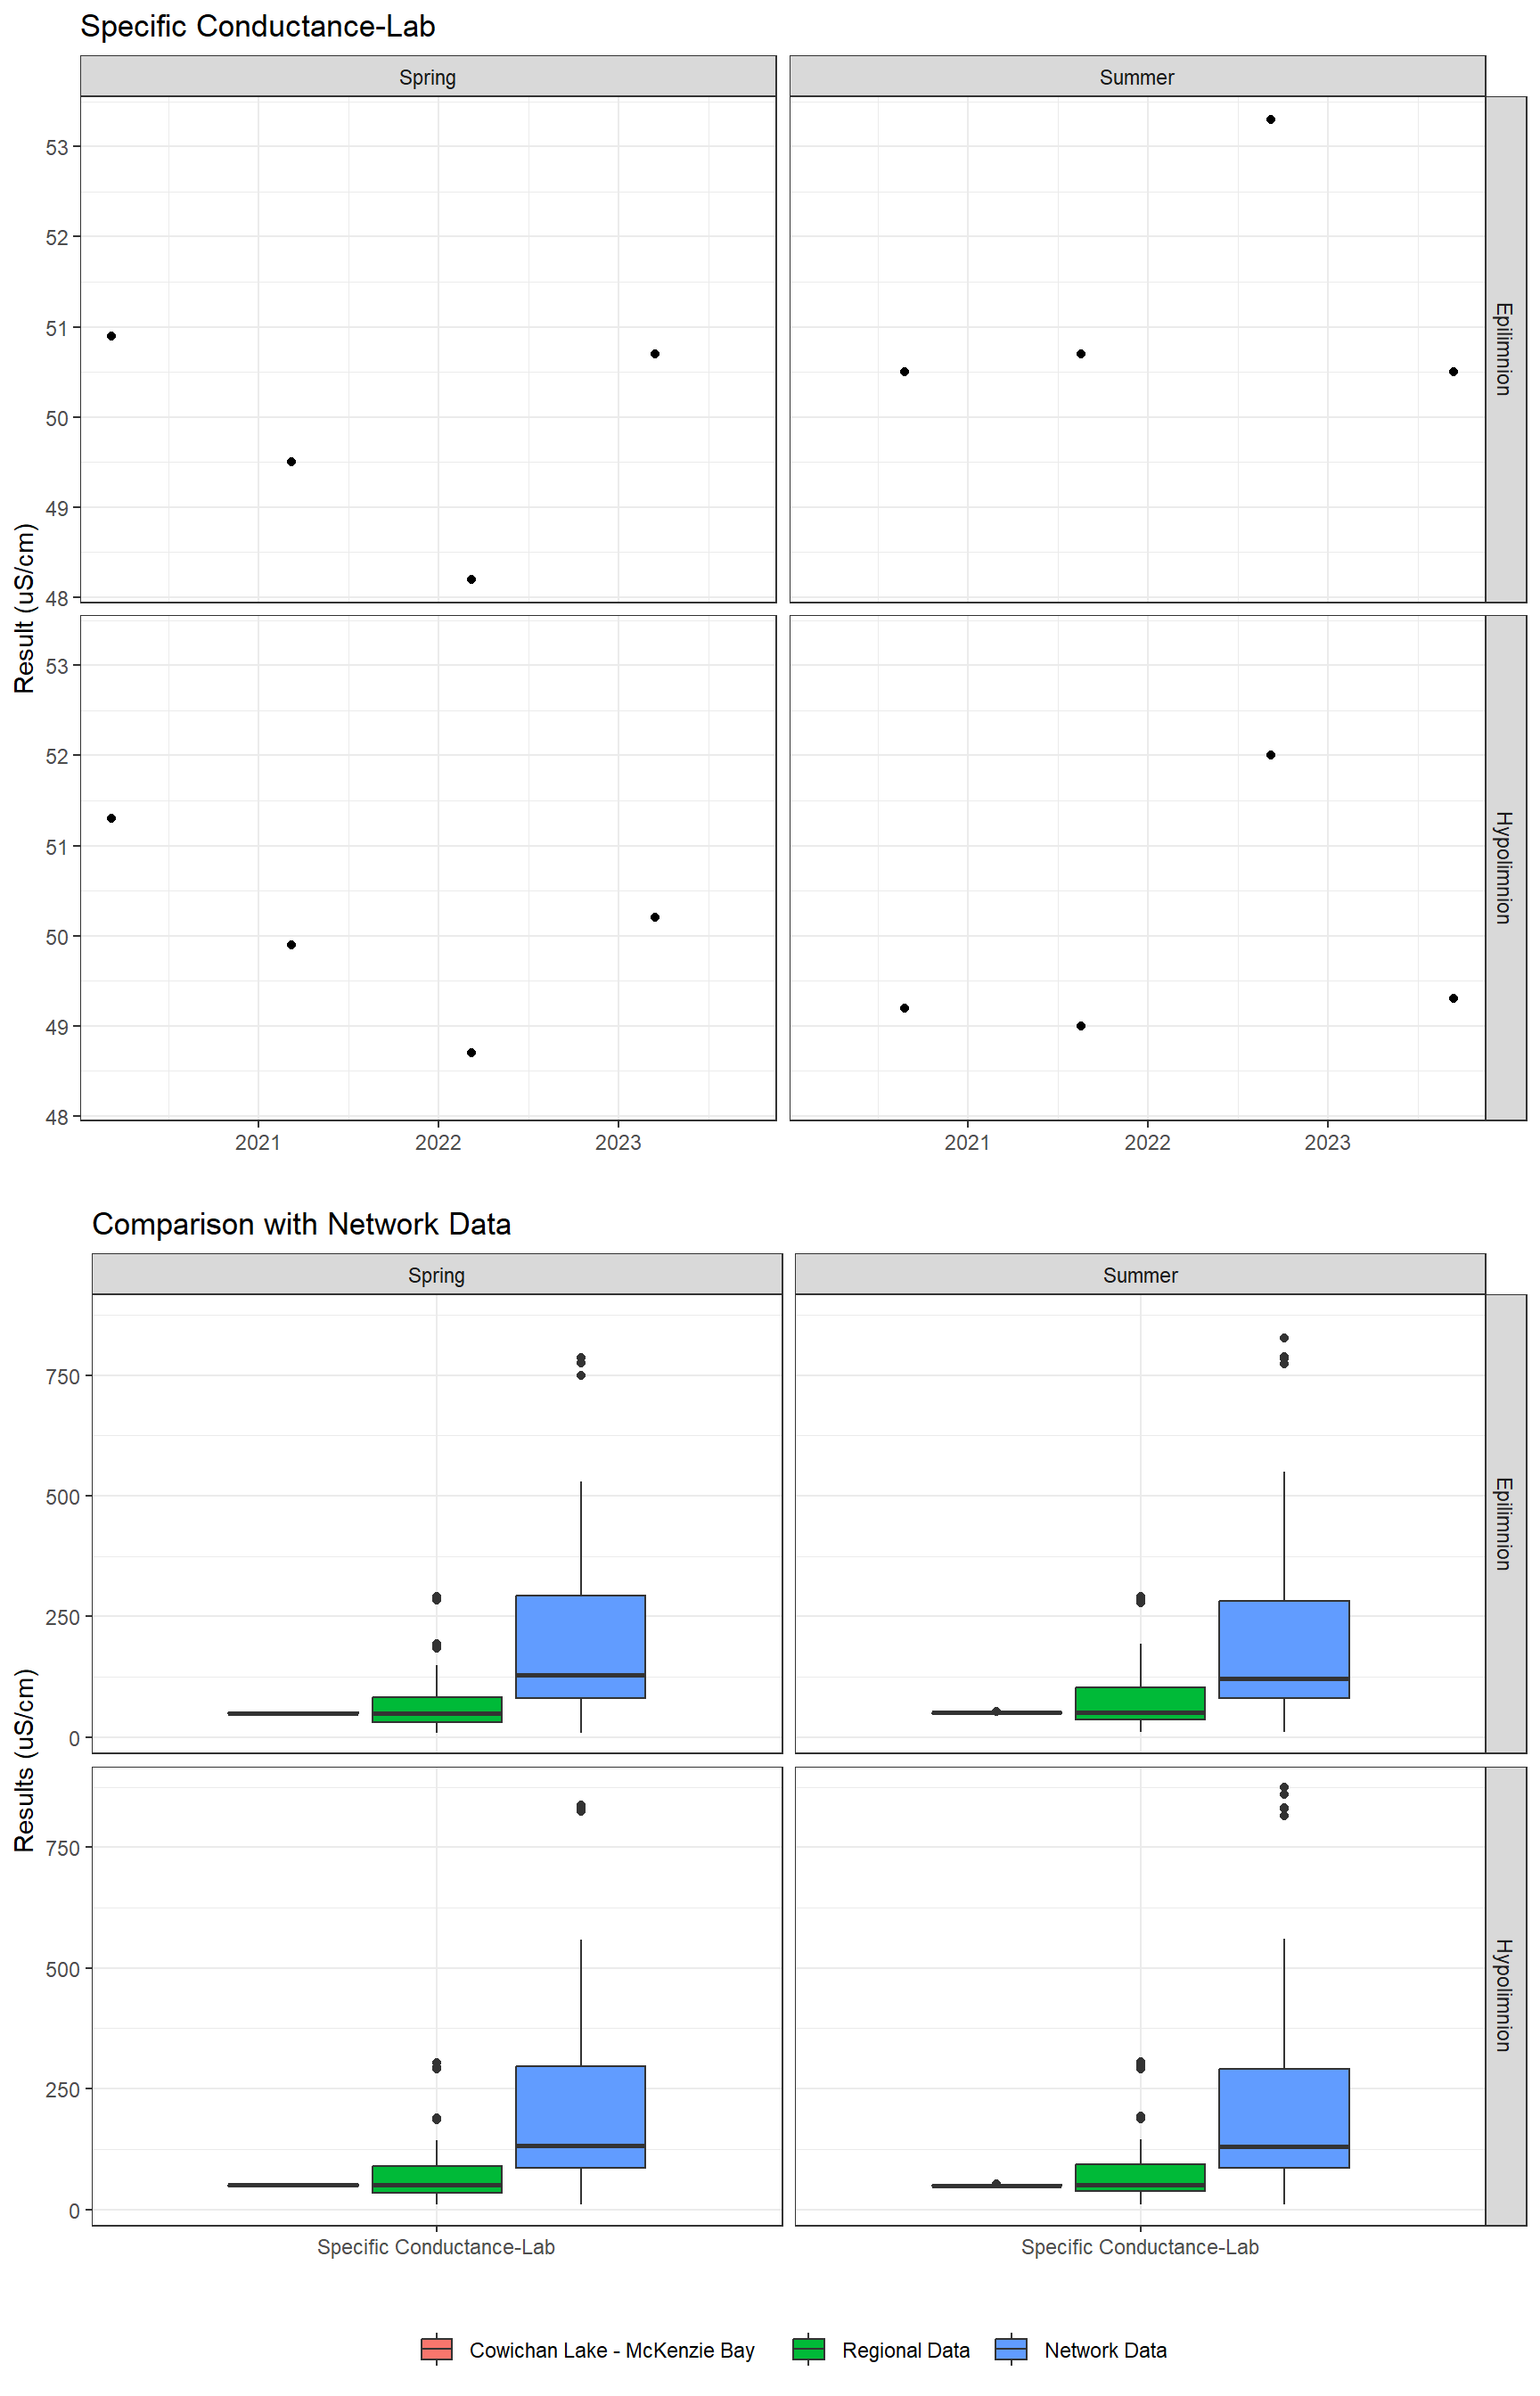 A plot showing results for Specific Conductance-Lab